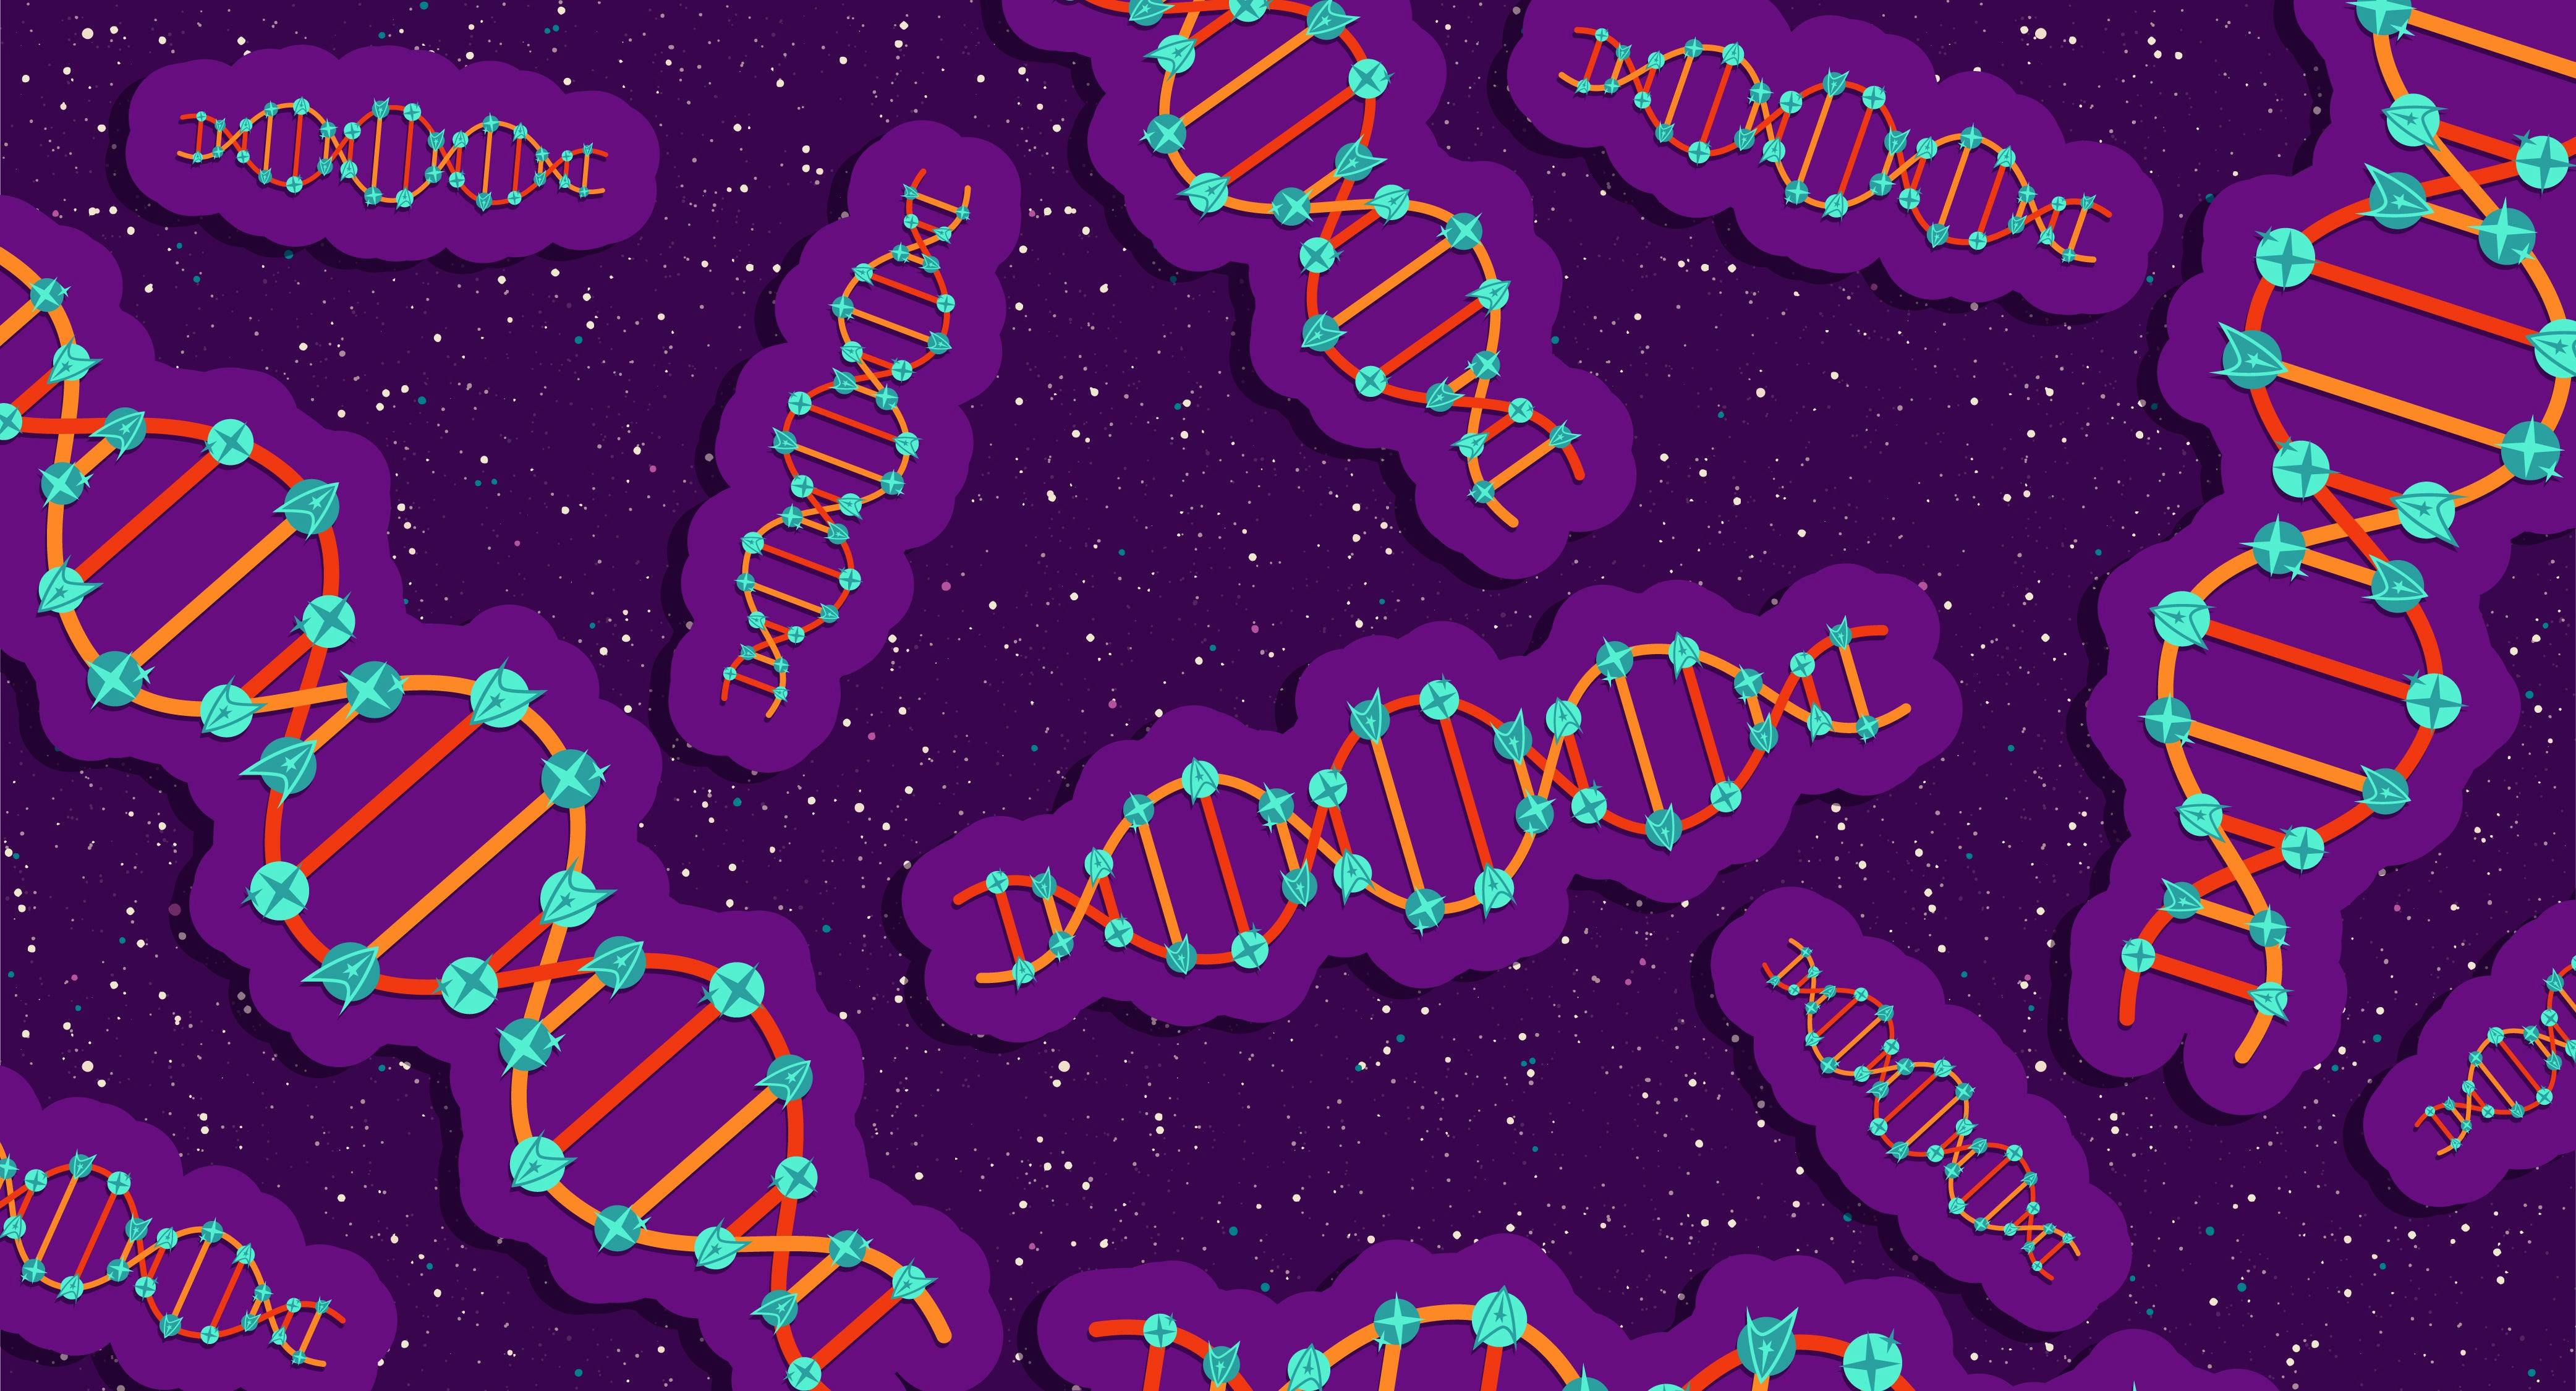 Several red and blue DNA strands float against a starry purple background